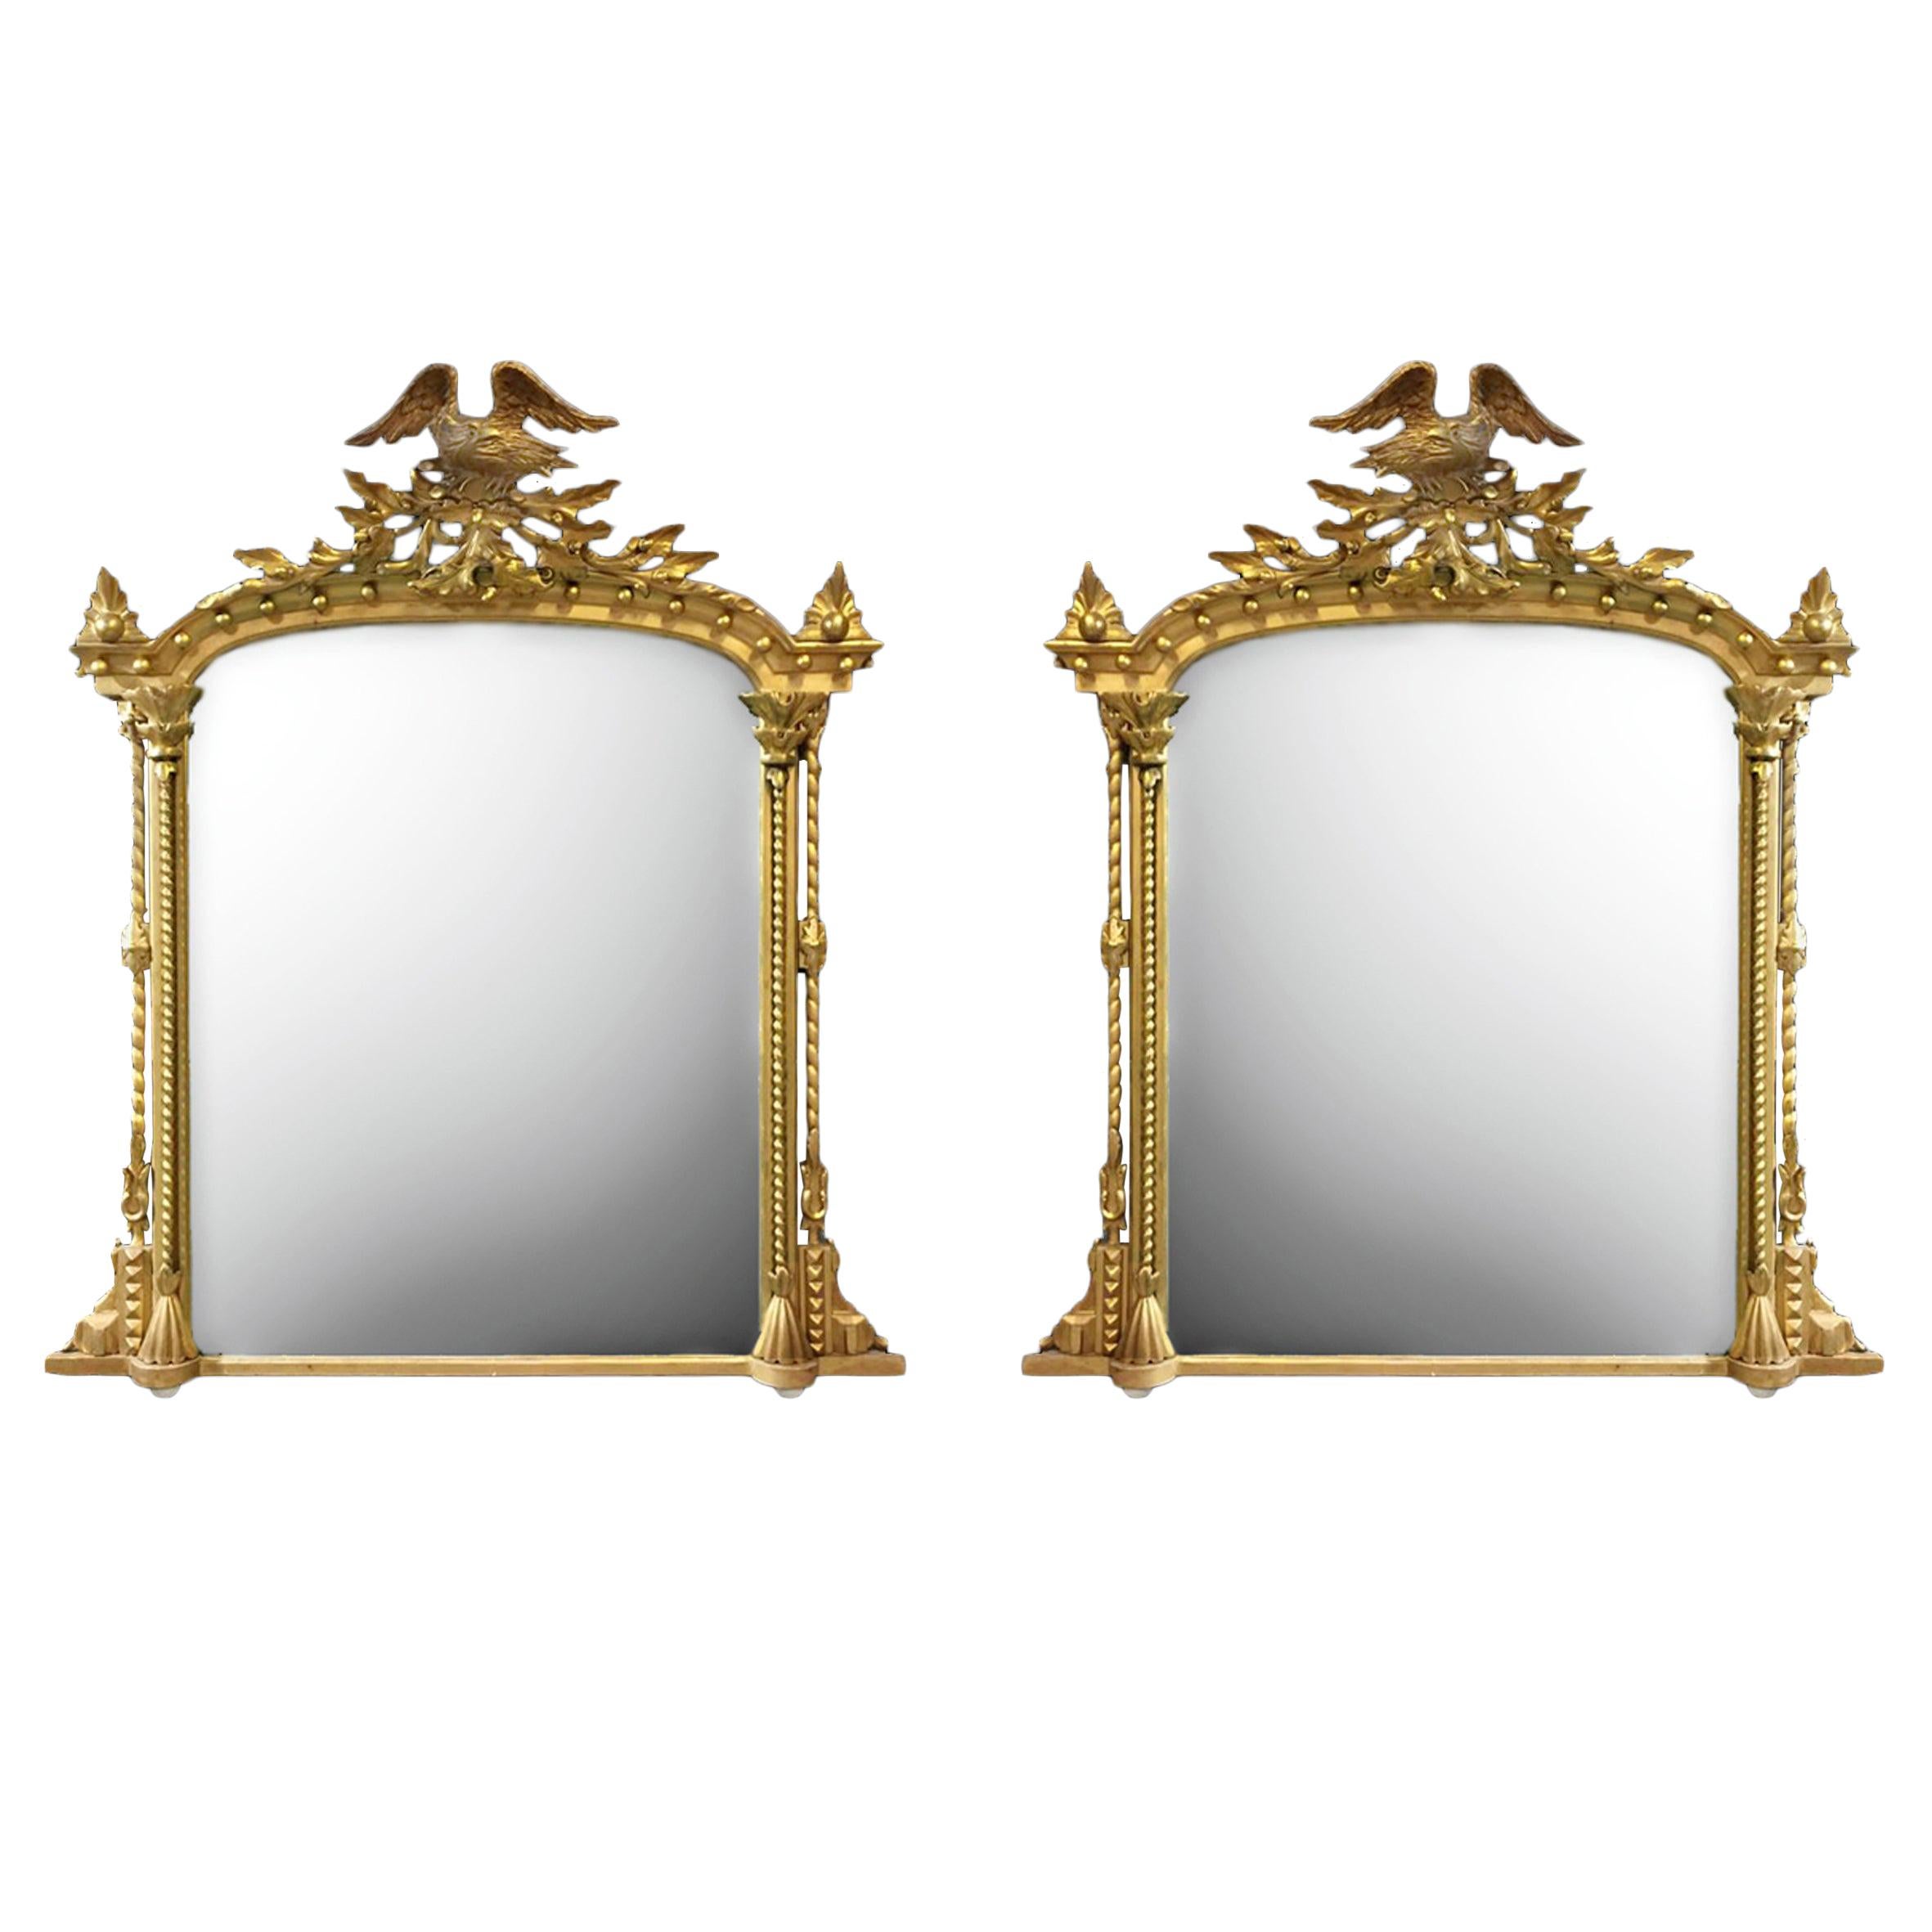 Pair of Giltwood Mirrors with Eagle Crestings